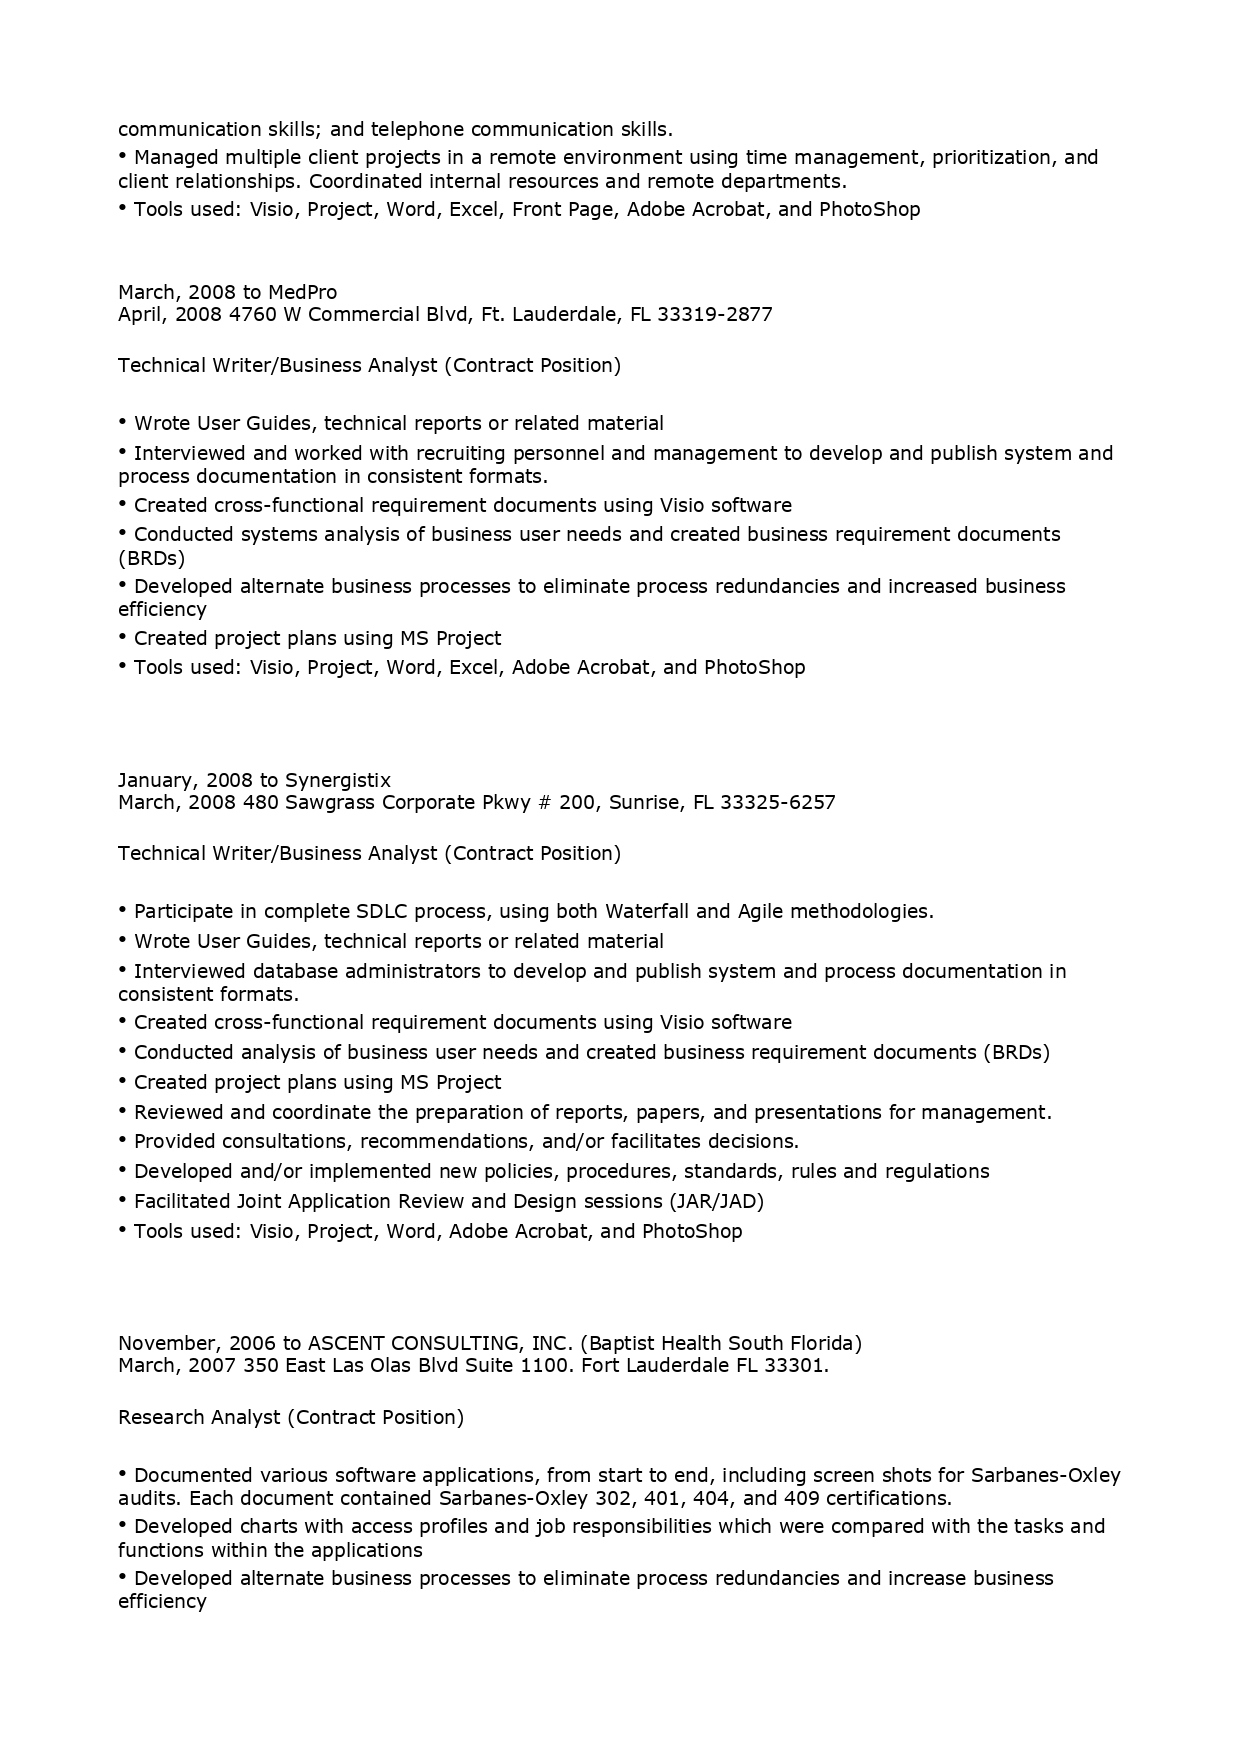 Technical Writer Business Analyst Resume regarding Business Analyst Documents Templates